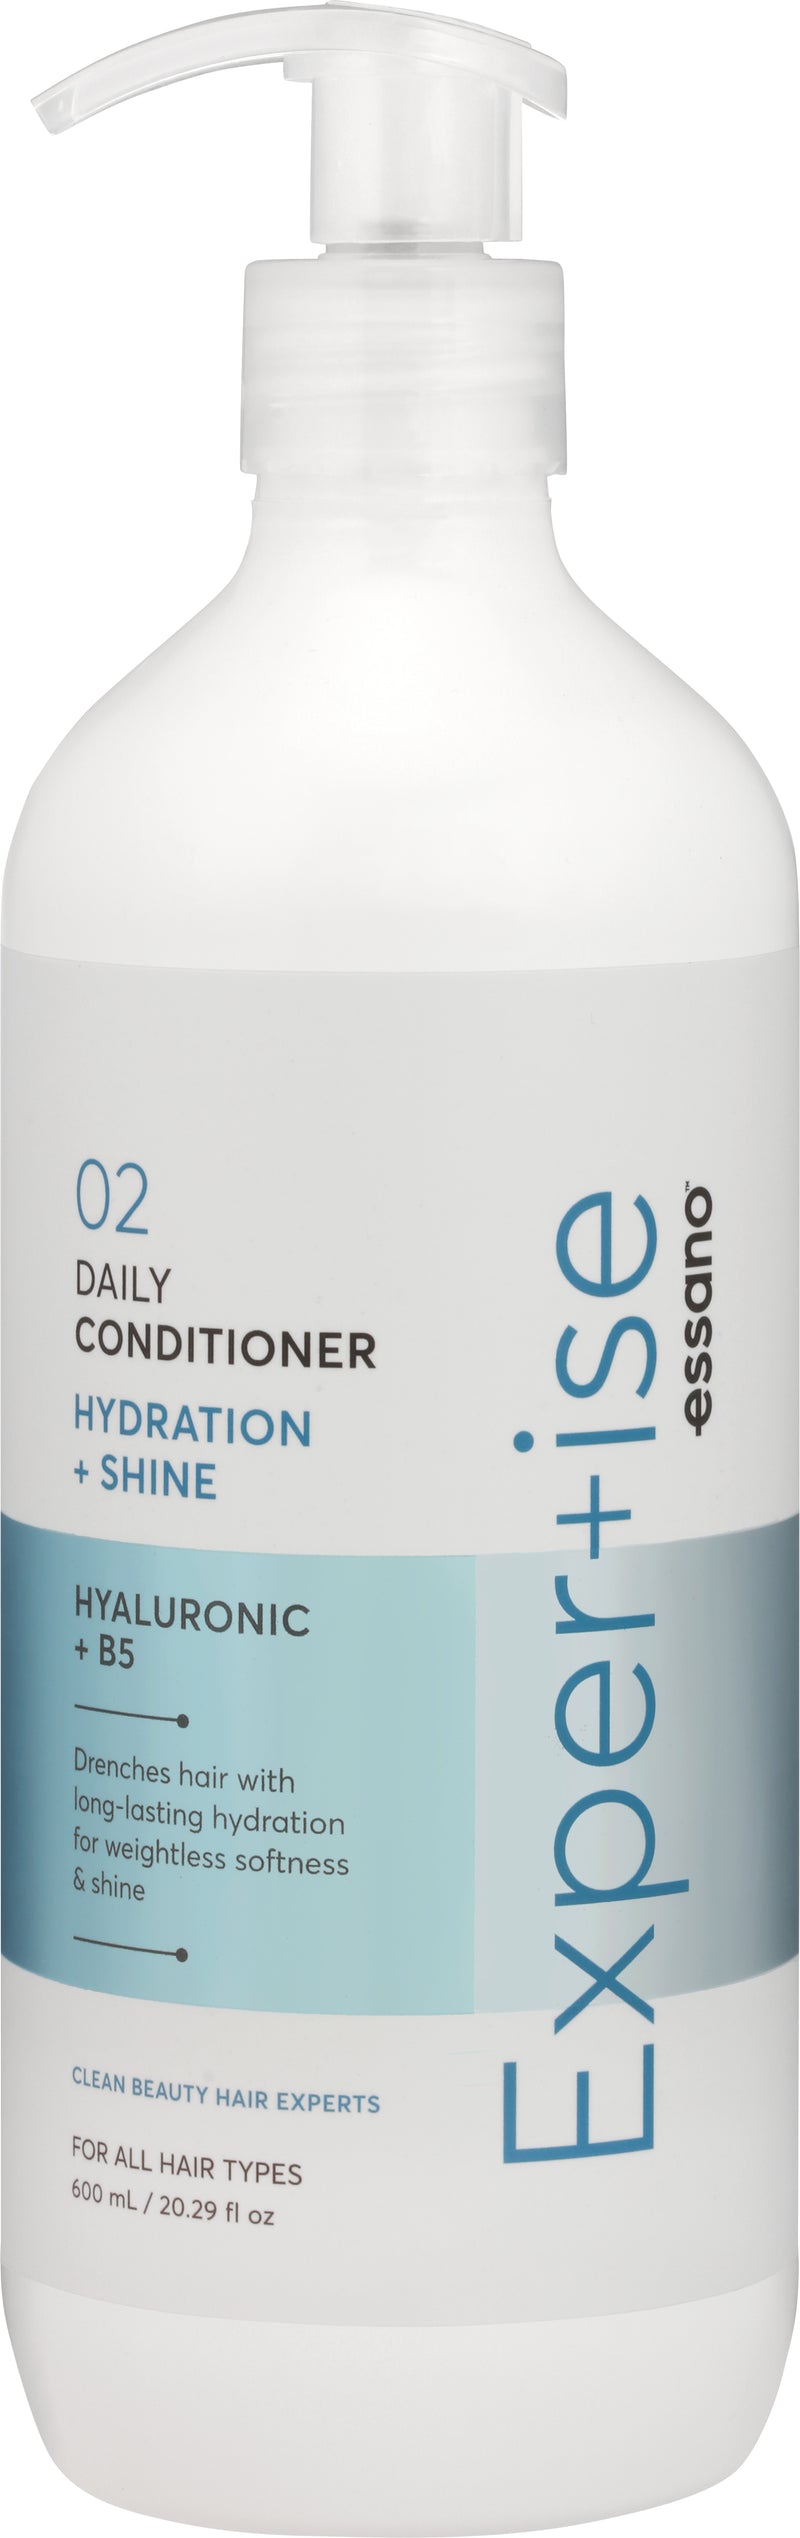 Essano Expertise Daily Hydration Conditioner 600ml